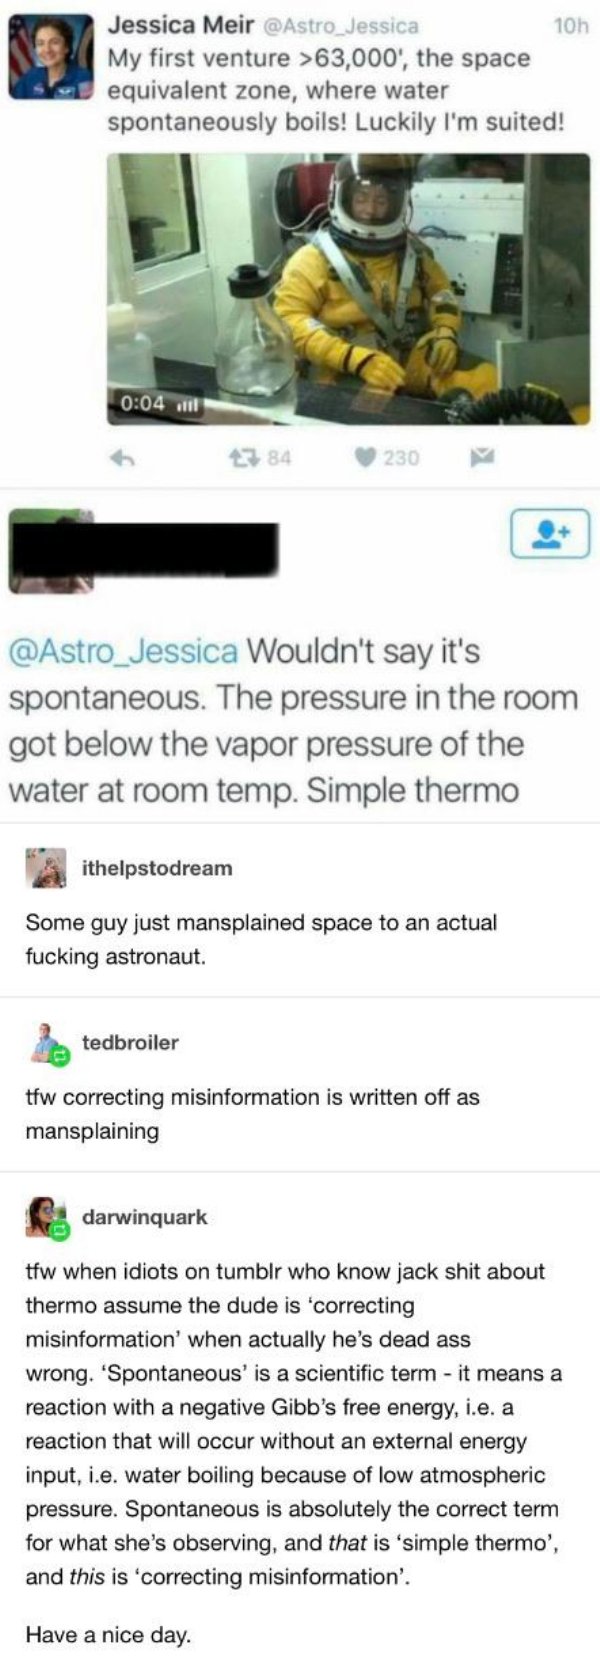 mansplaining astronaut - 10h Jessica Meir My first venture >63,000', the space equivalent zone, where water spontaneously boils! Luckily I'm suited! all 2384 230 Wouldn't say it's spontaneous. The pressure in the room got below the vapor pressure of the w